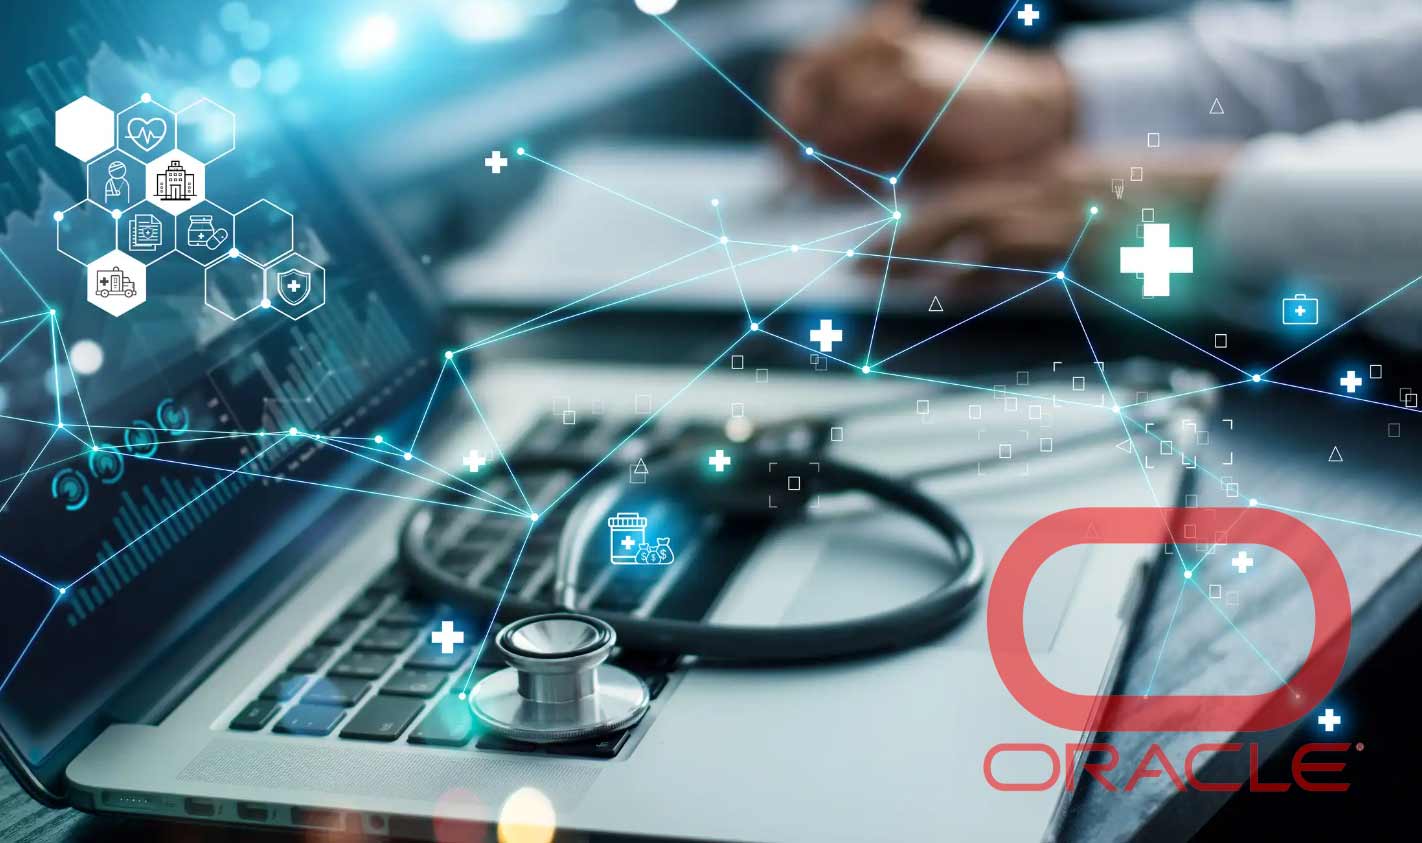 Oracle has announced new healthcare-focused features for its Fusion Cloud Applications